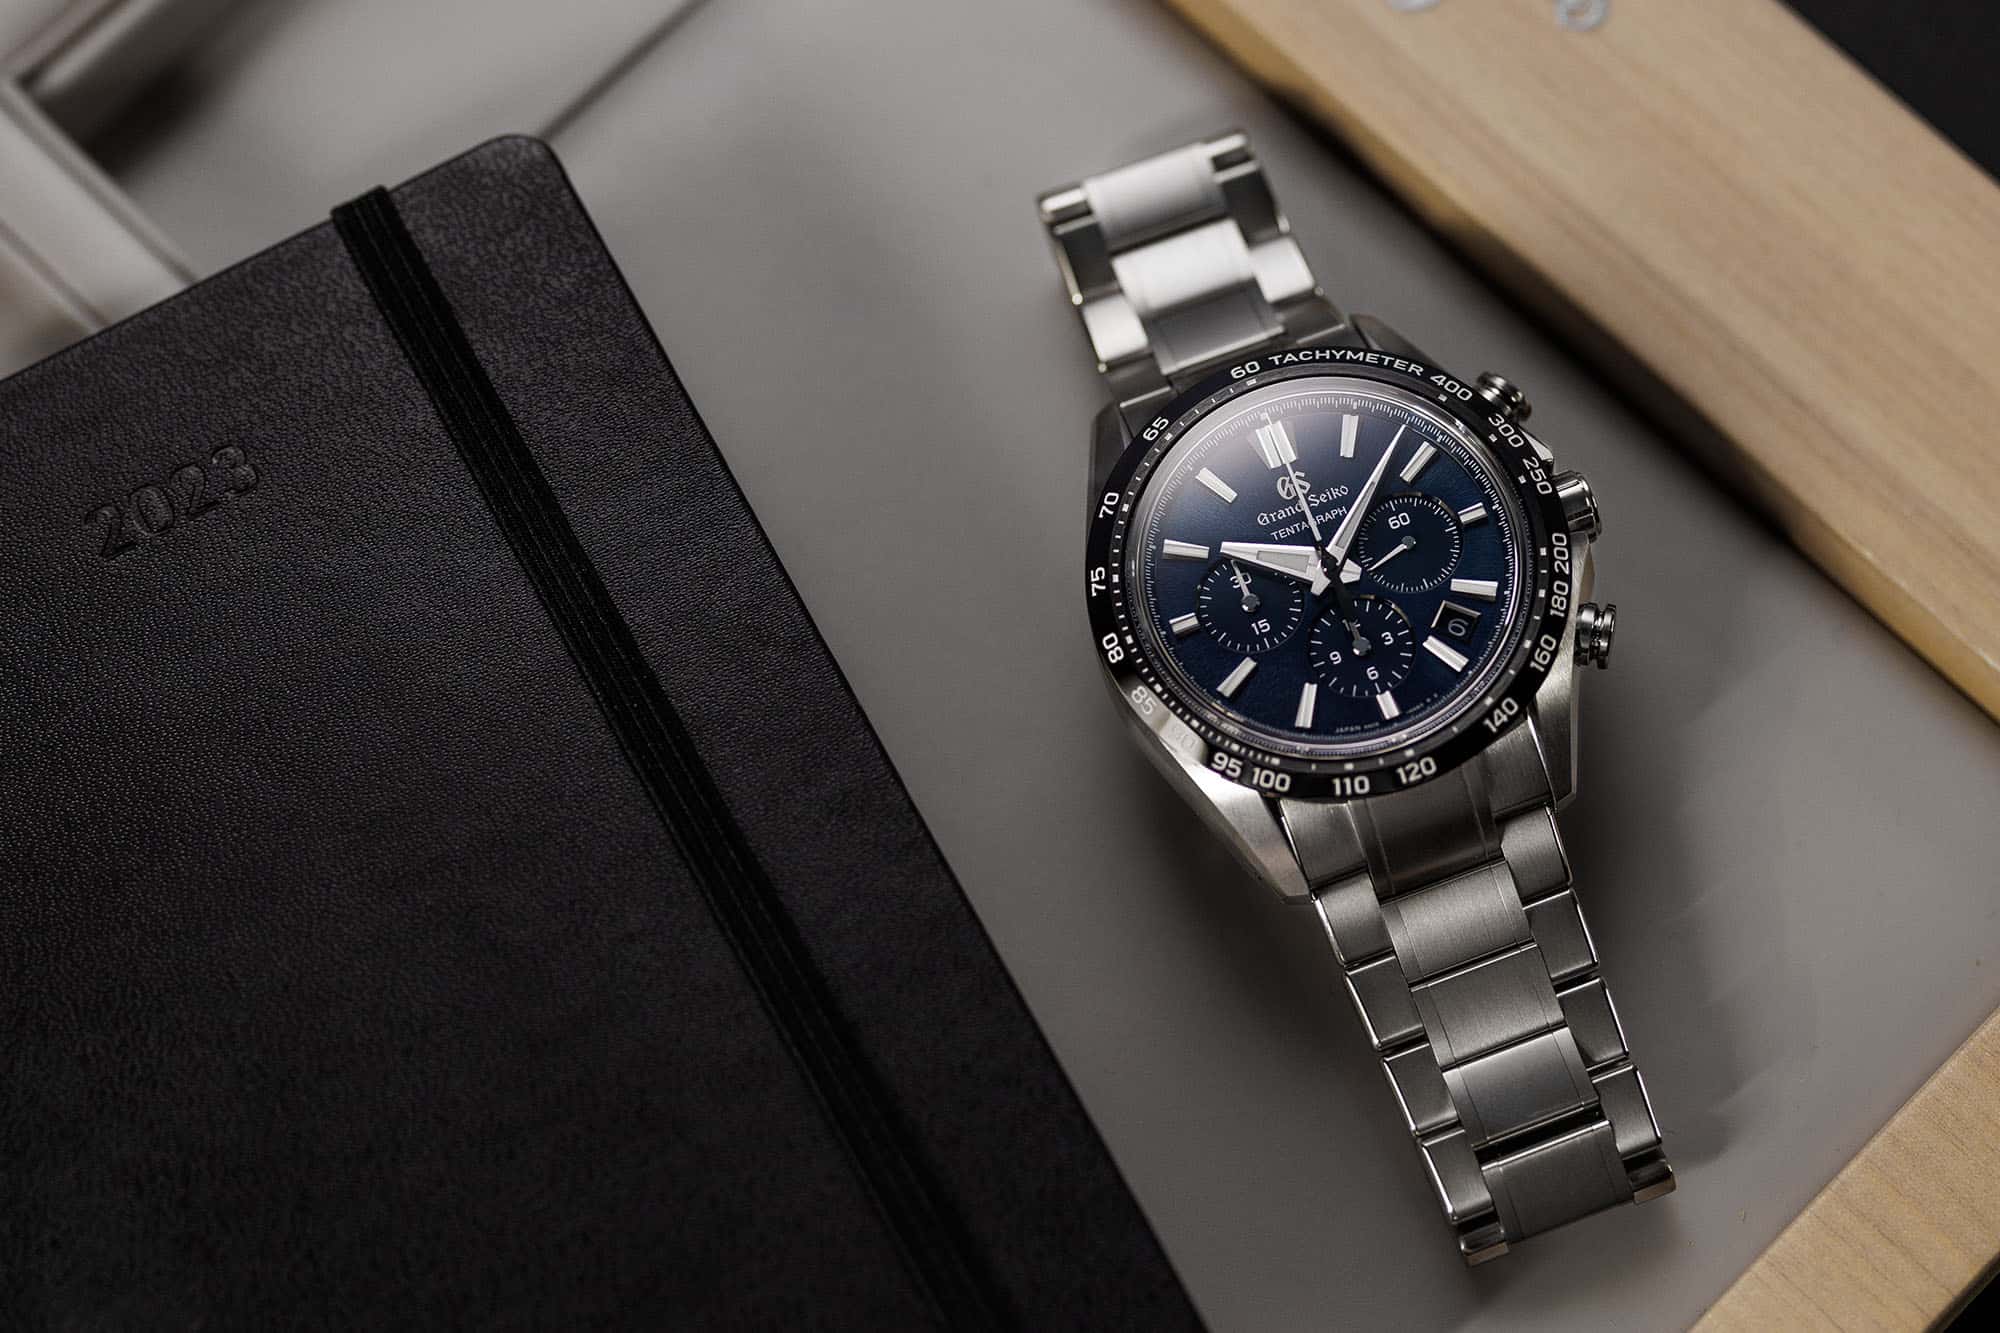 Grand Seiko Unveils the Tentagraph, New Sports Chronograph a Three Day Power Reserve and High Frequency Movement - Worn Wound